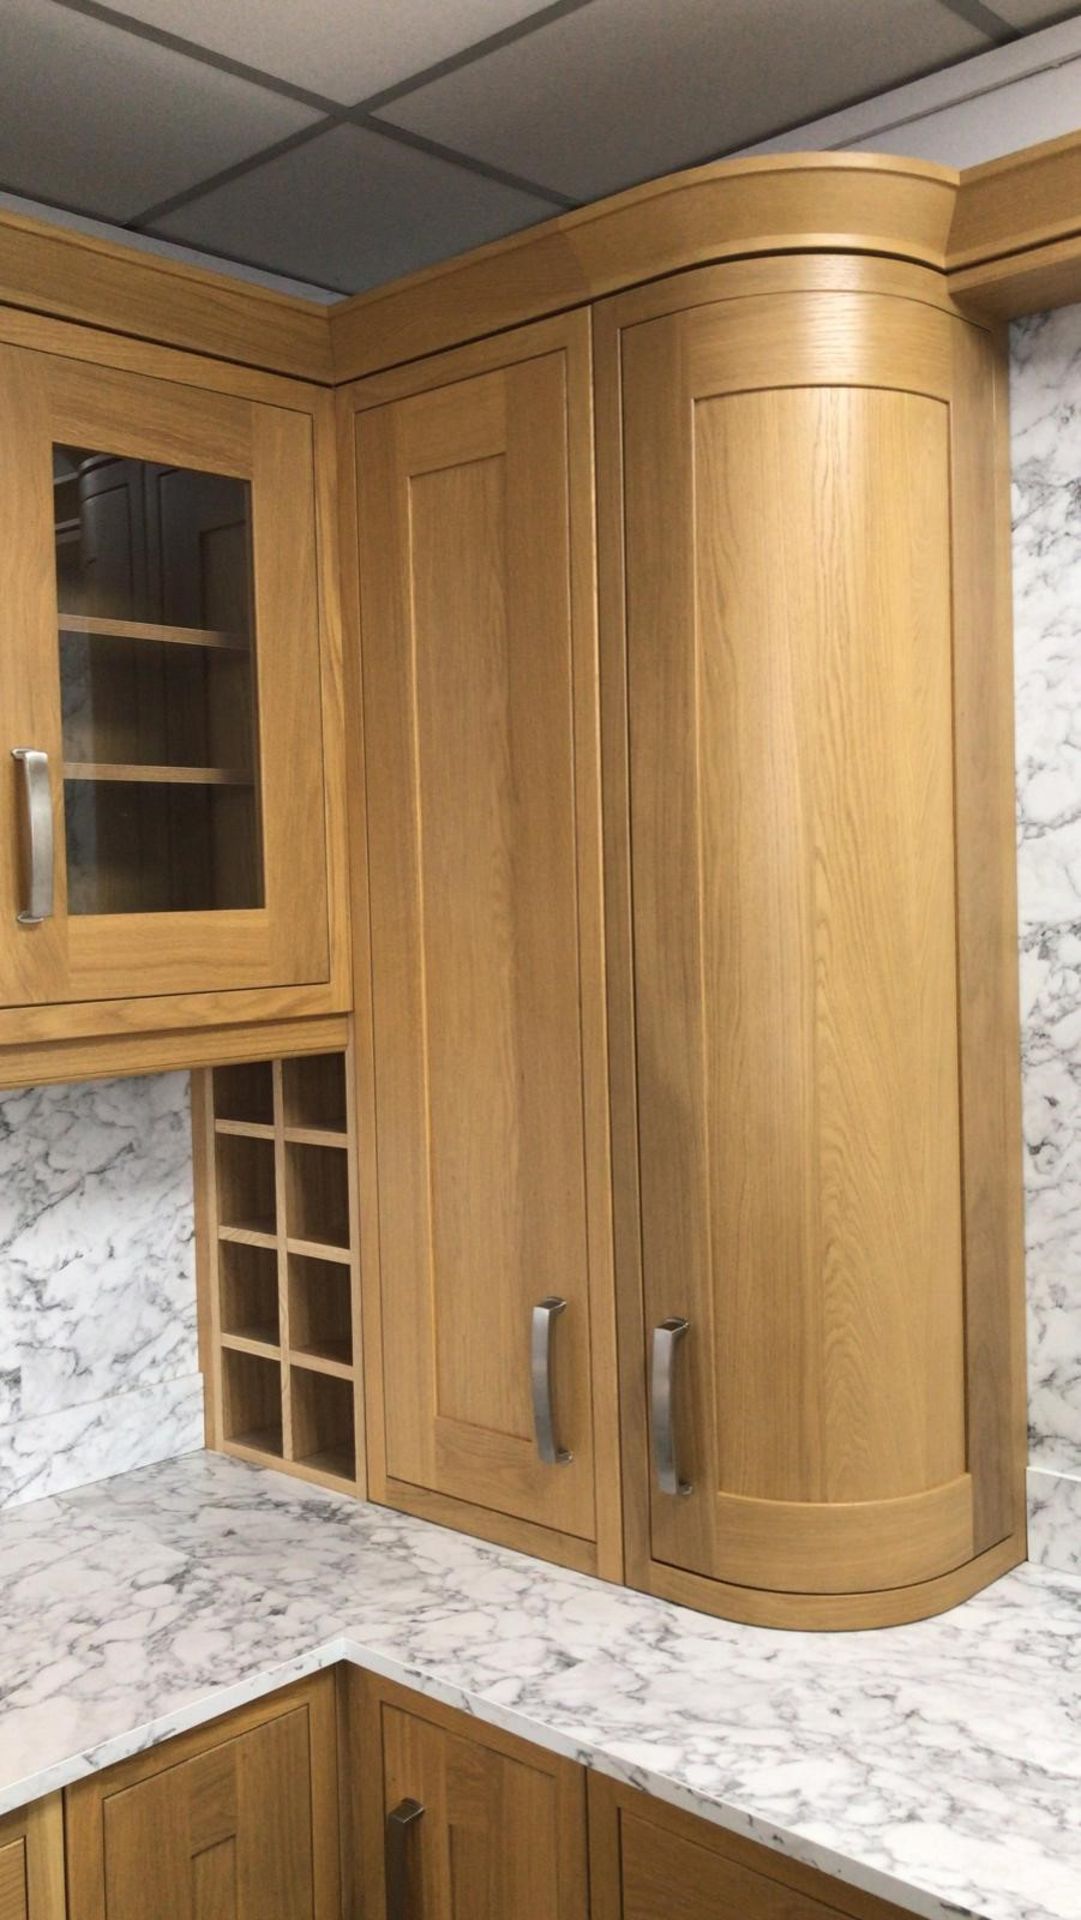 Circa 5000+ items Solid oak inframe kitchen doors inc over 100 curved doors etc, circa 87 pallets (2 - Image 3 of 15